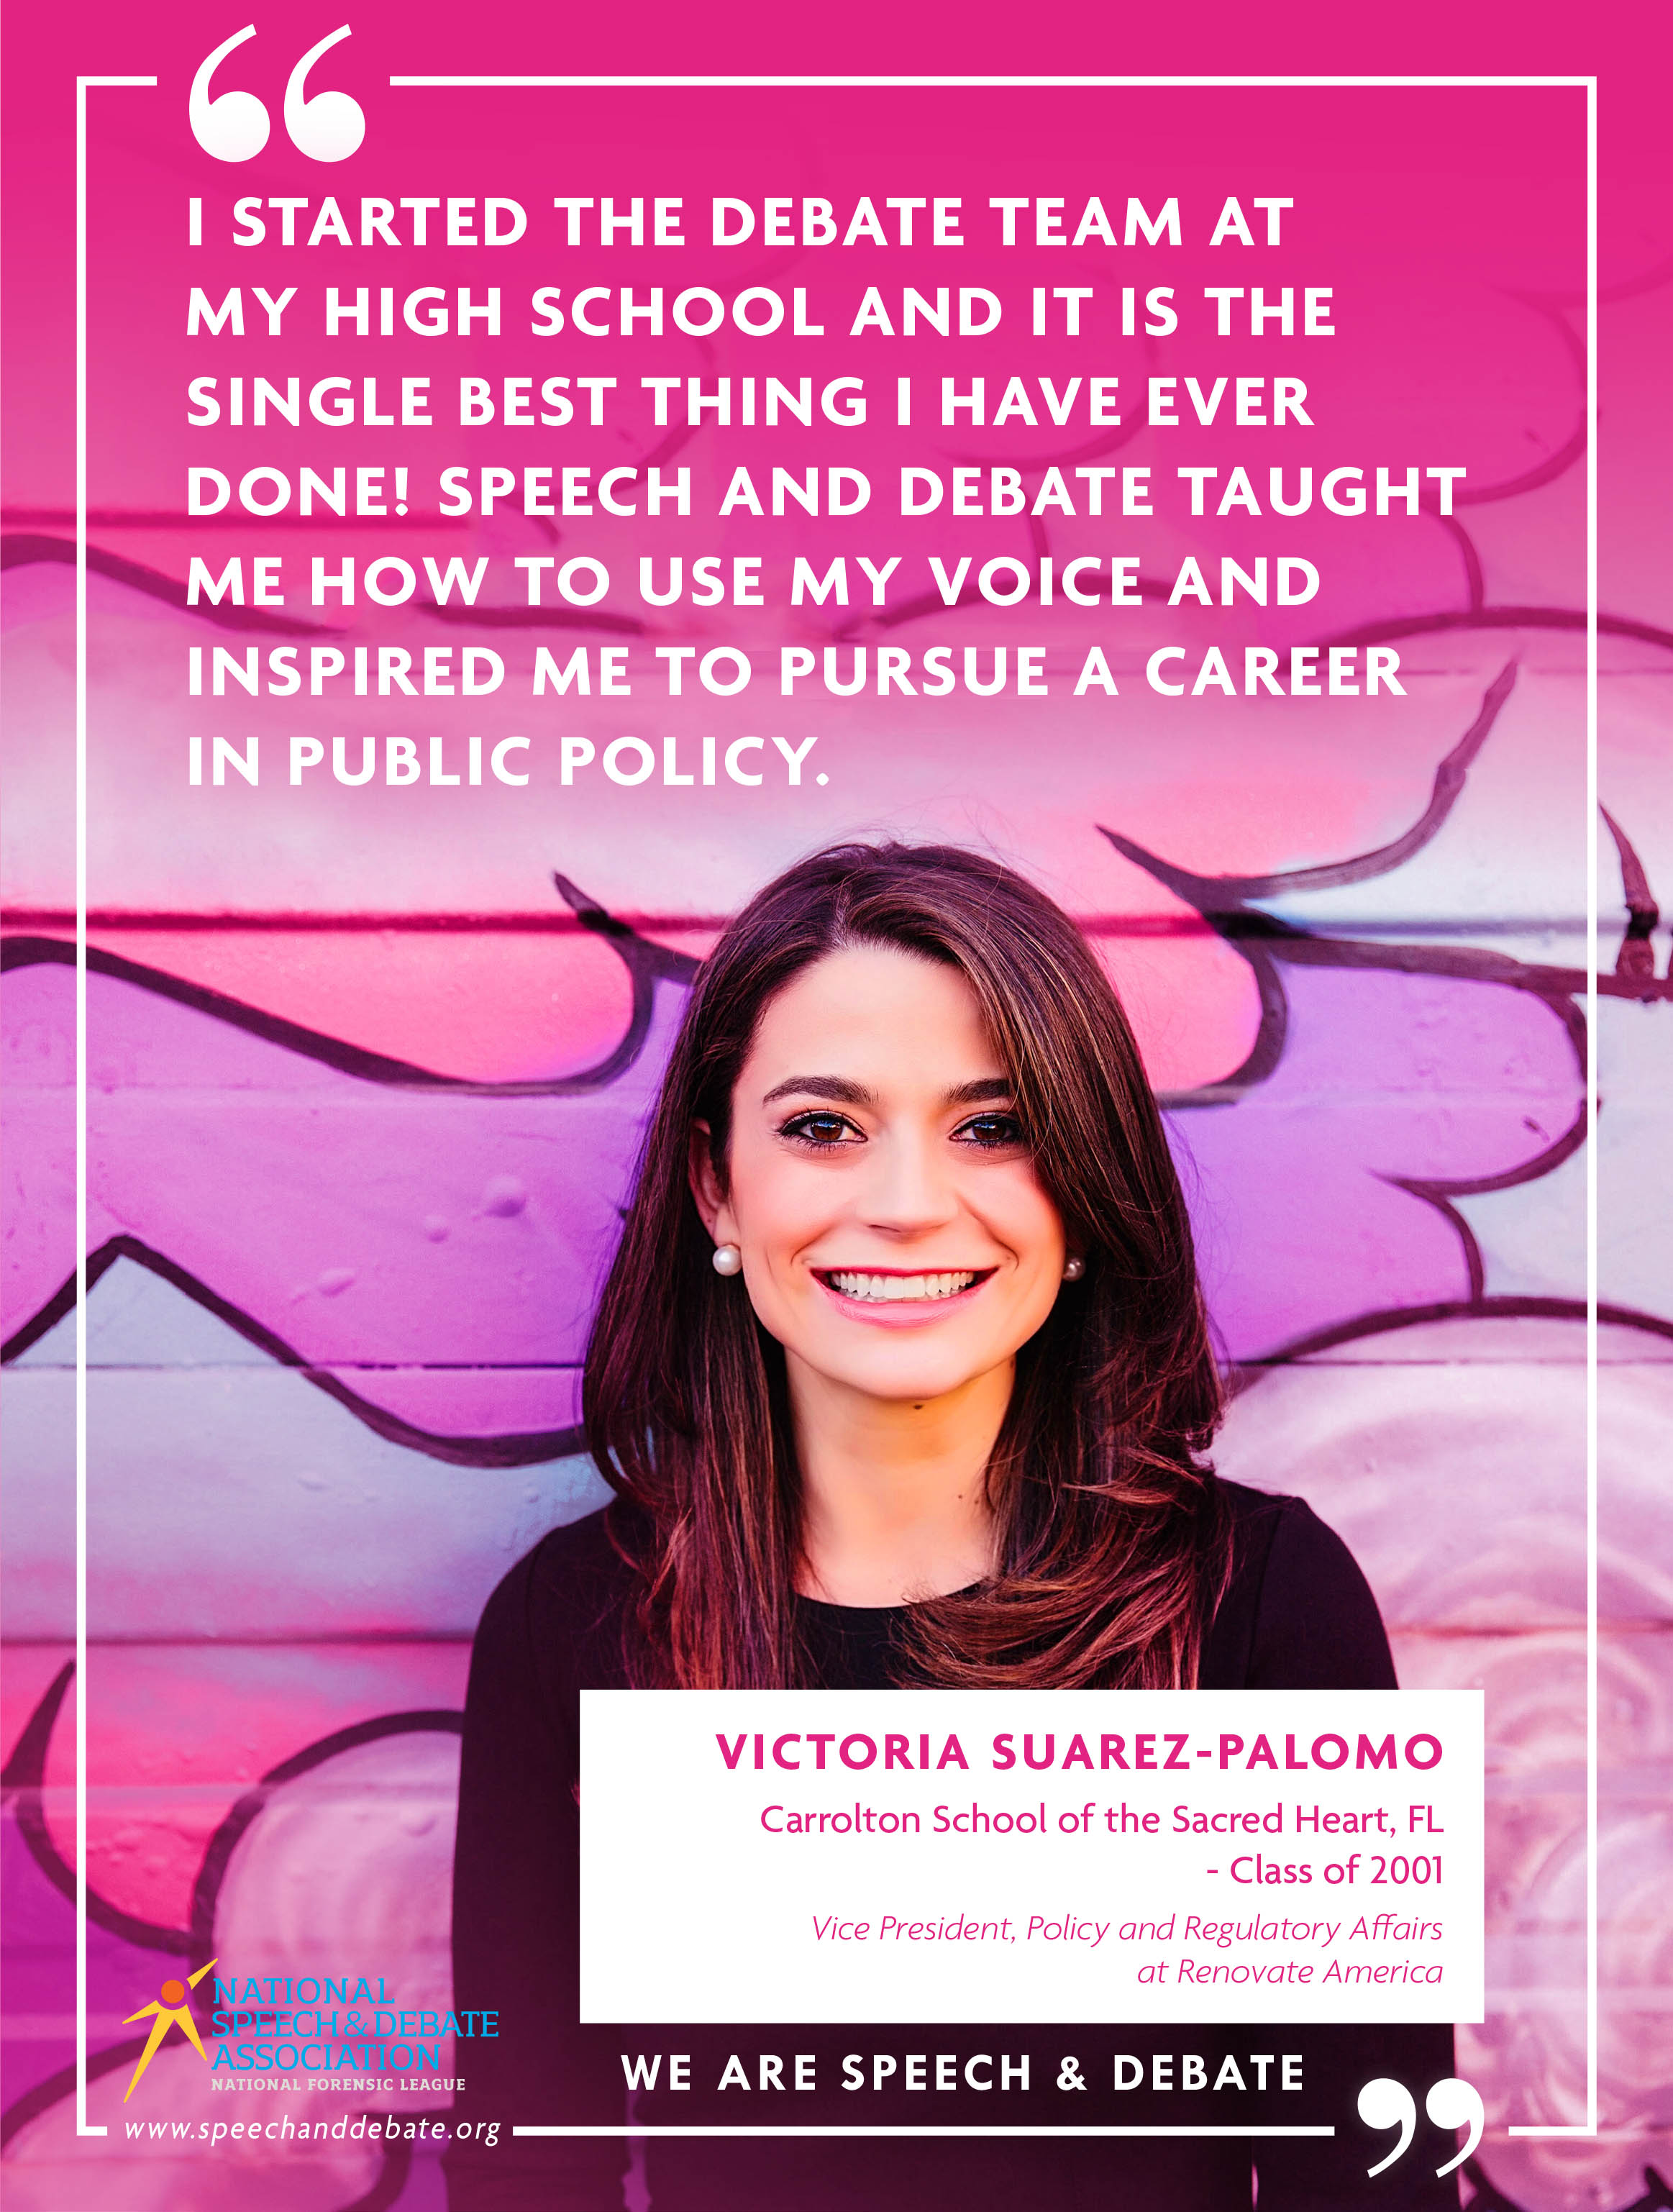 "I STARTED THE DEBATE TEAM AT MY HIGH SCHOOL AND IT IS THE SINGLE BEST THING I HAVE EVER DONE! SPEECH AND DEBATE TAUGHT ME HOW TO USE MY VOICE AND INSPIRED ME TO PURSUE A CAREER IN PUBLIC POLICY" - Victoria Suarez-Palomo